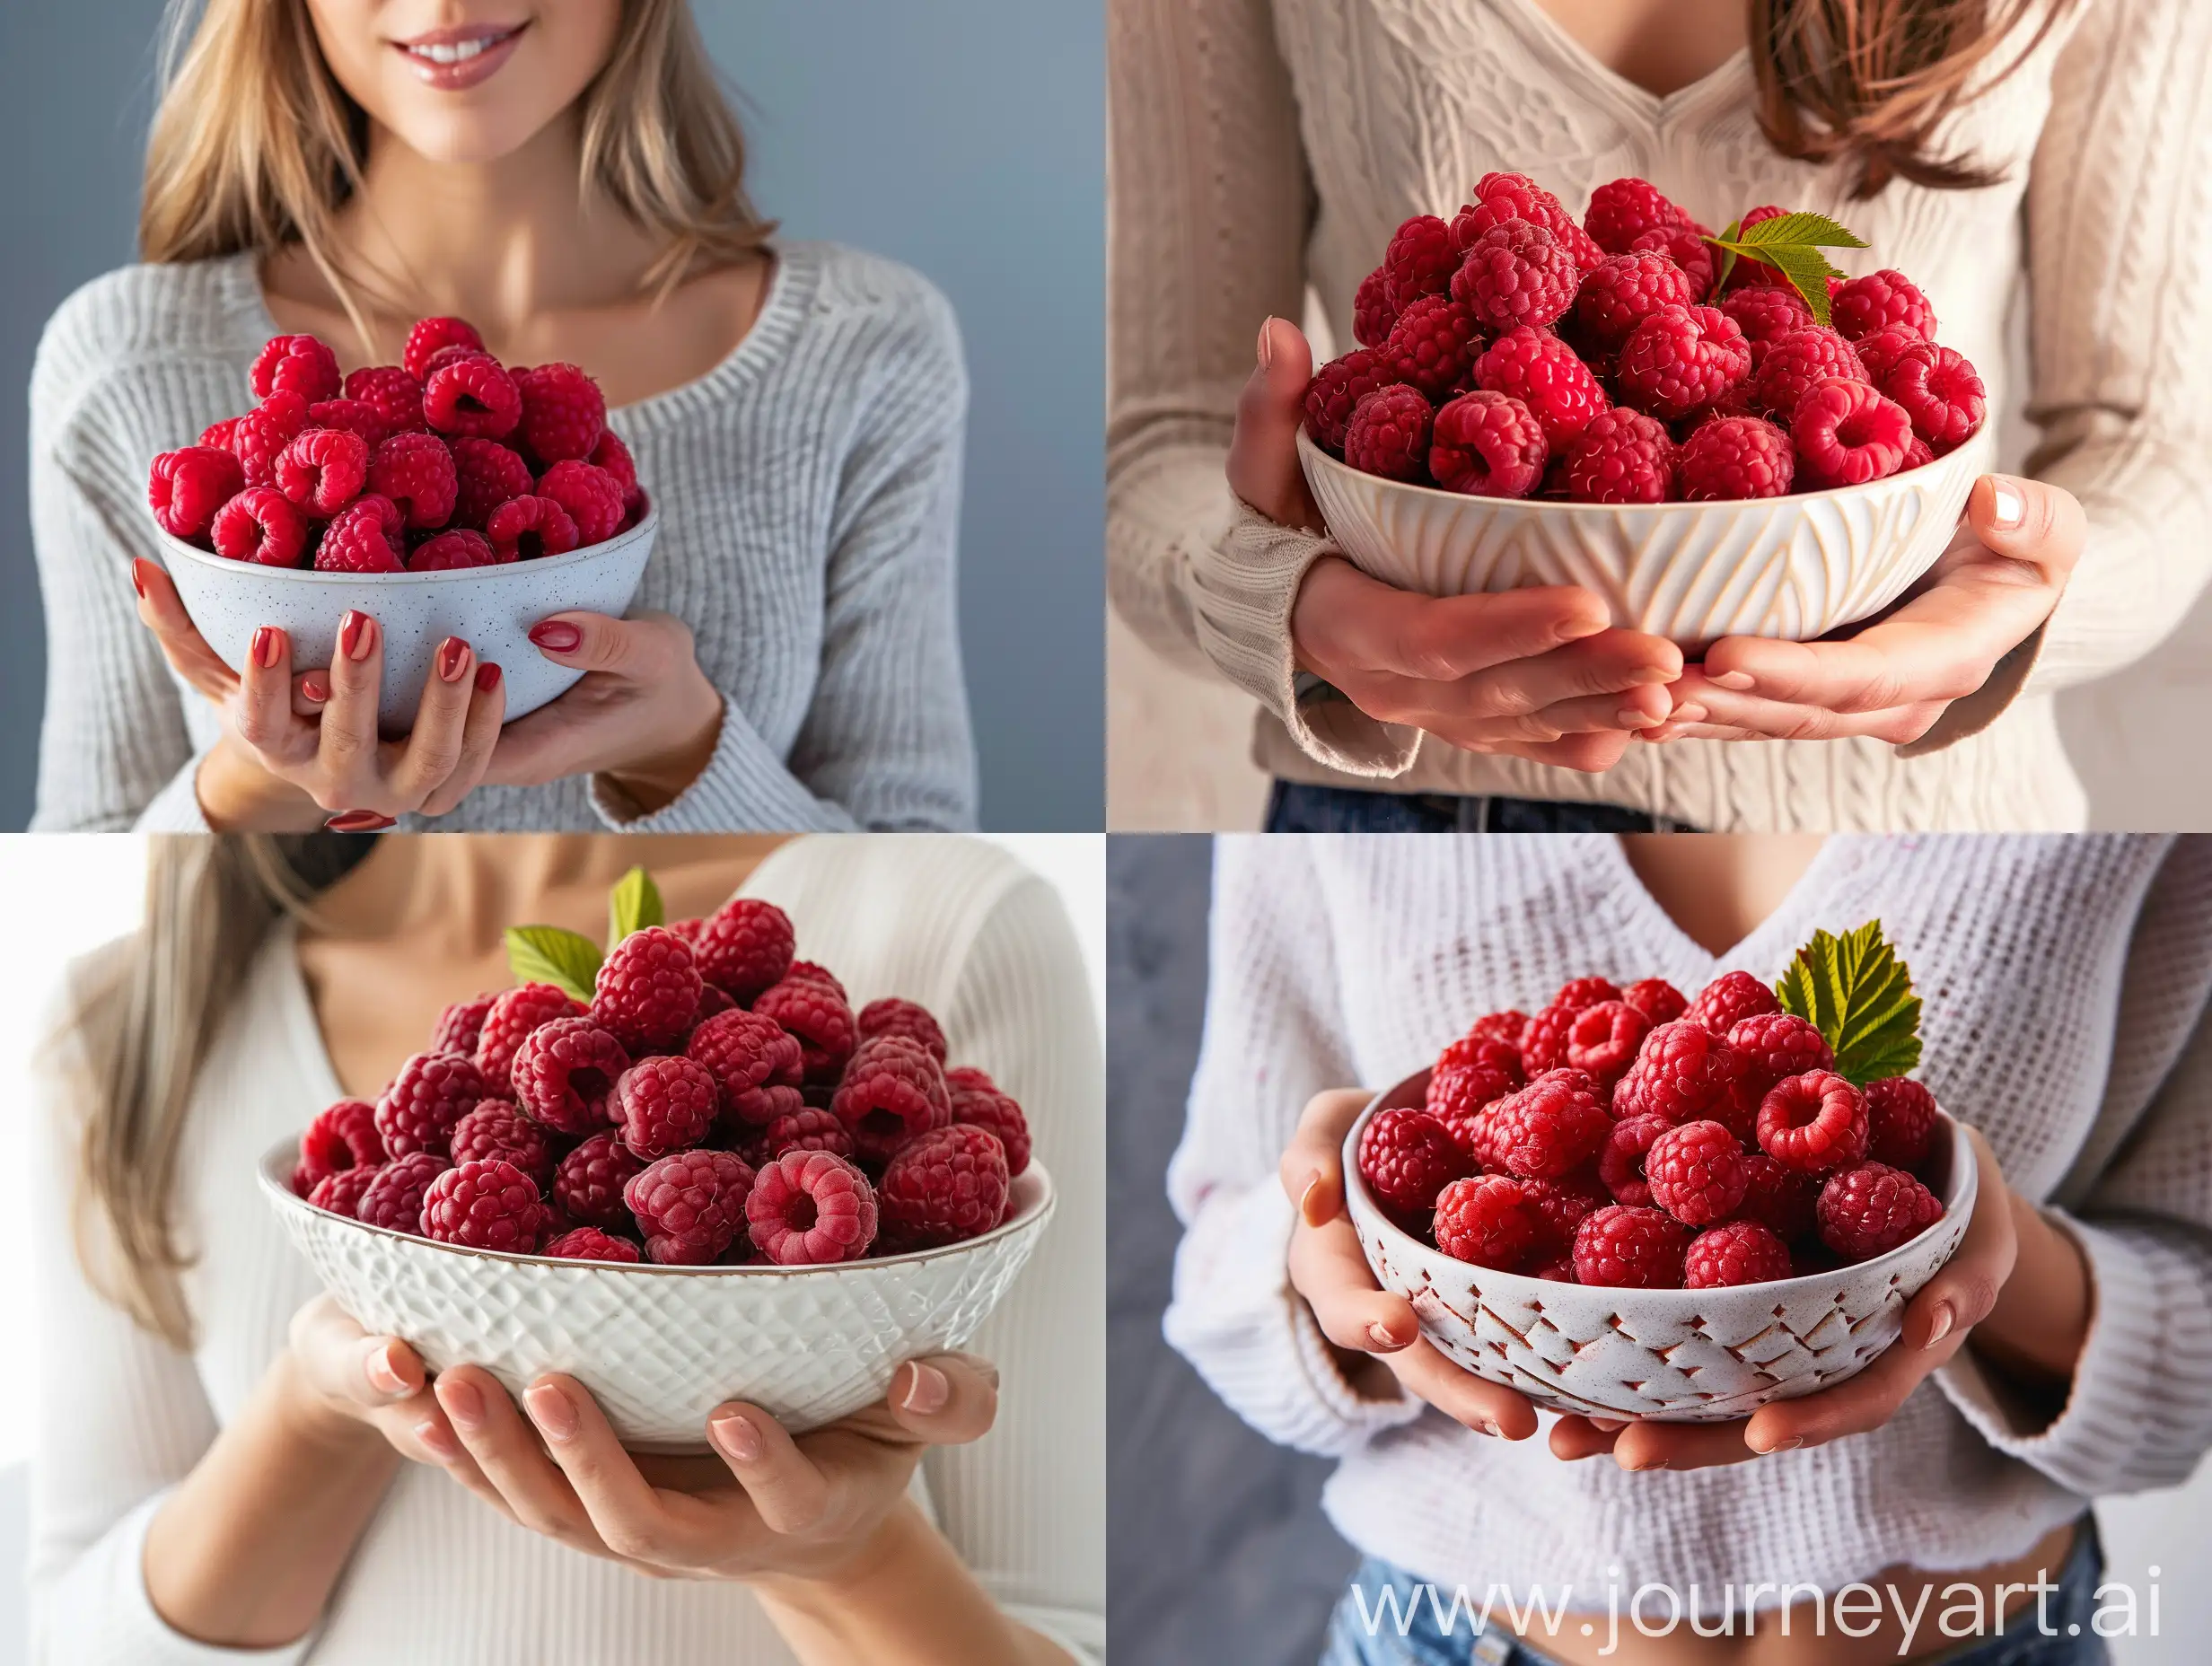 Attractive advertising photo of a woman holding a bowl full of raspberries